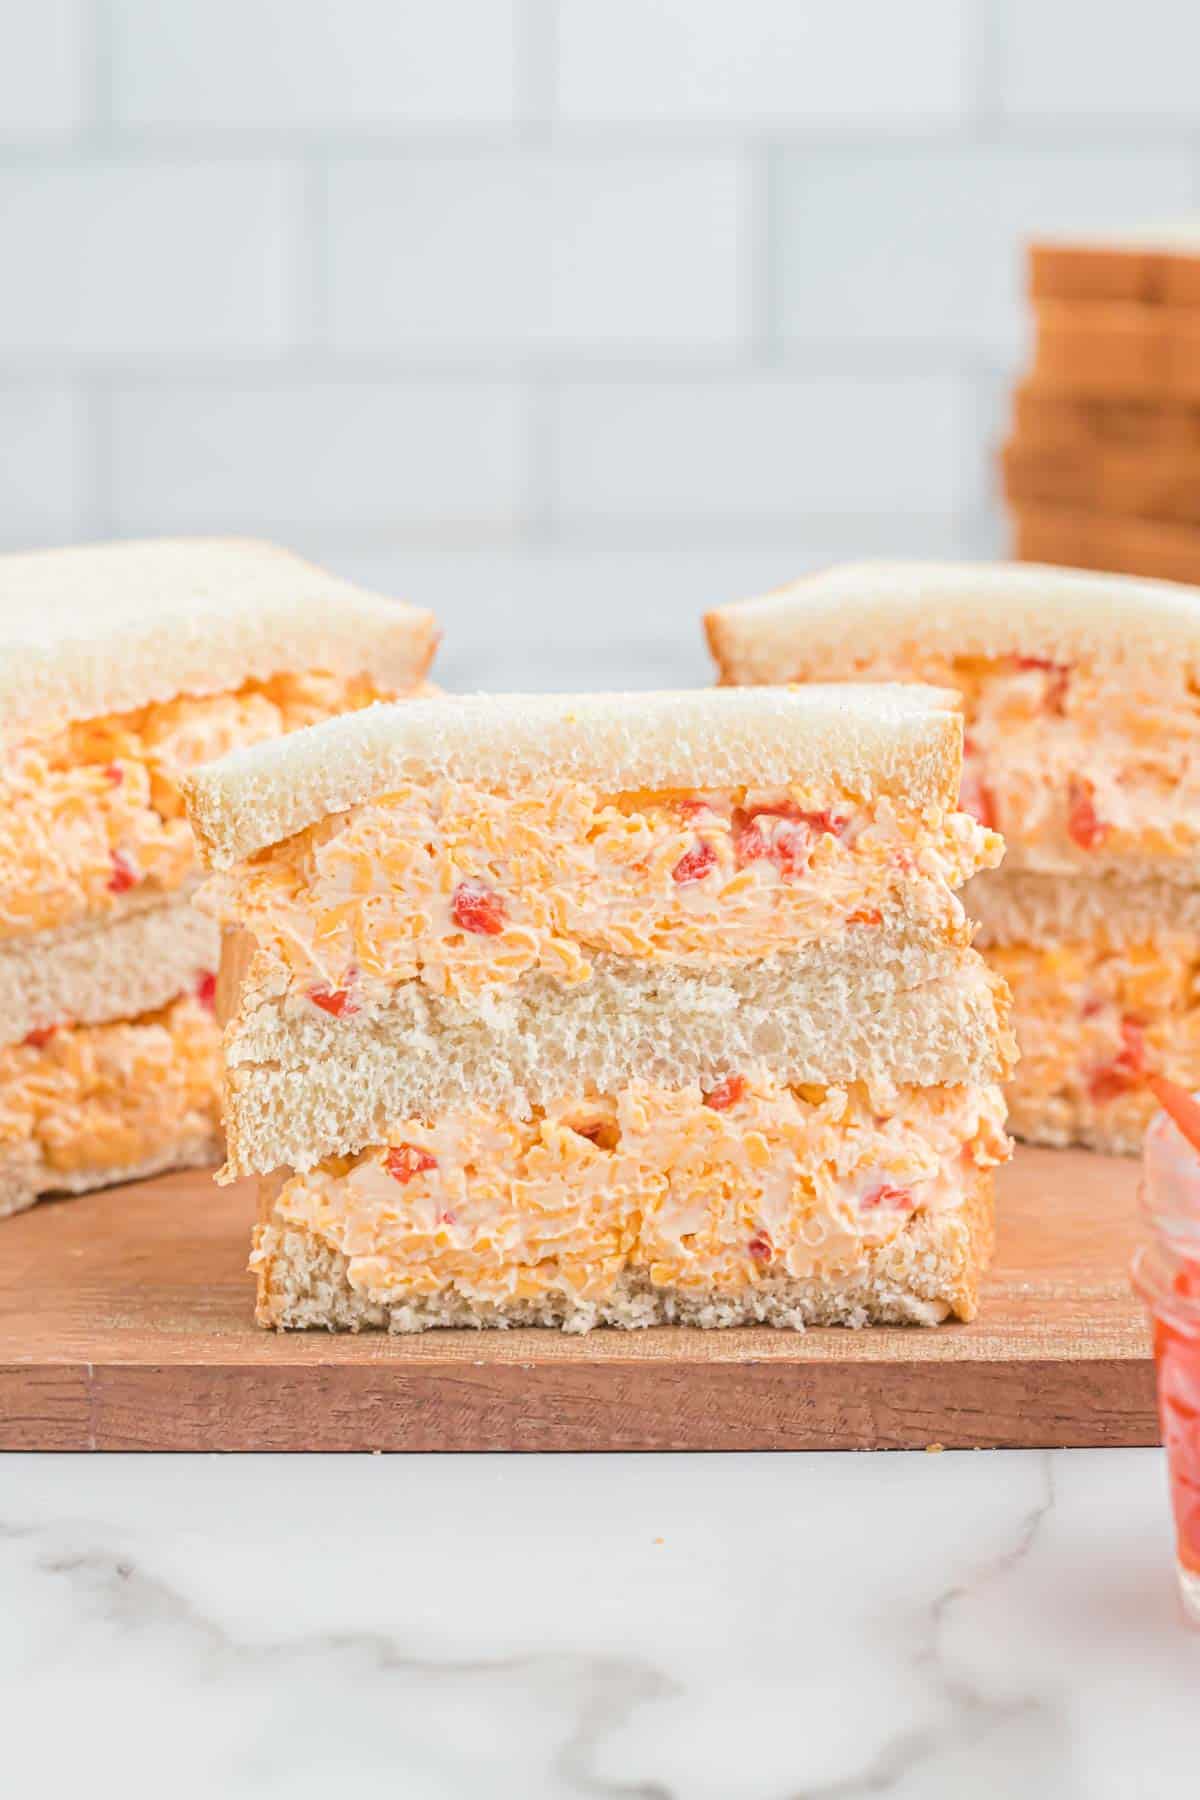 pimento cheese sandwich cut in half and stacked